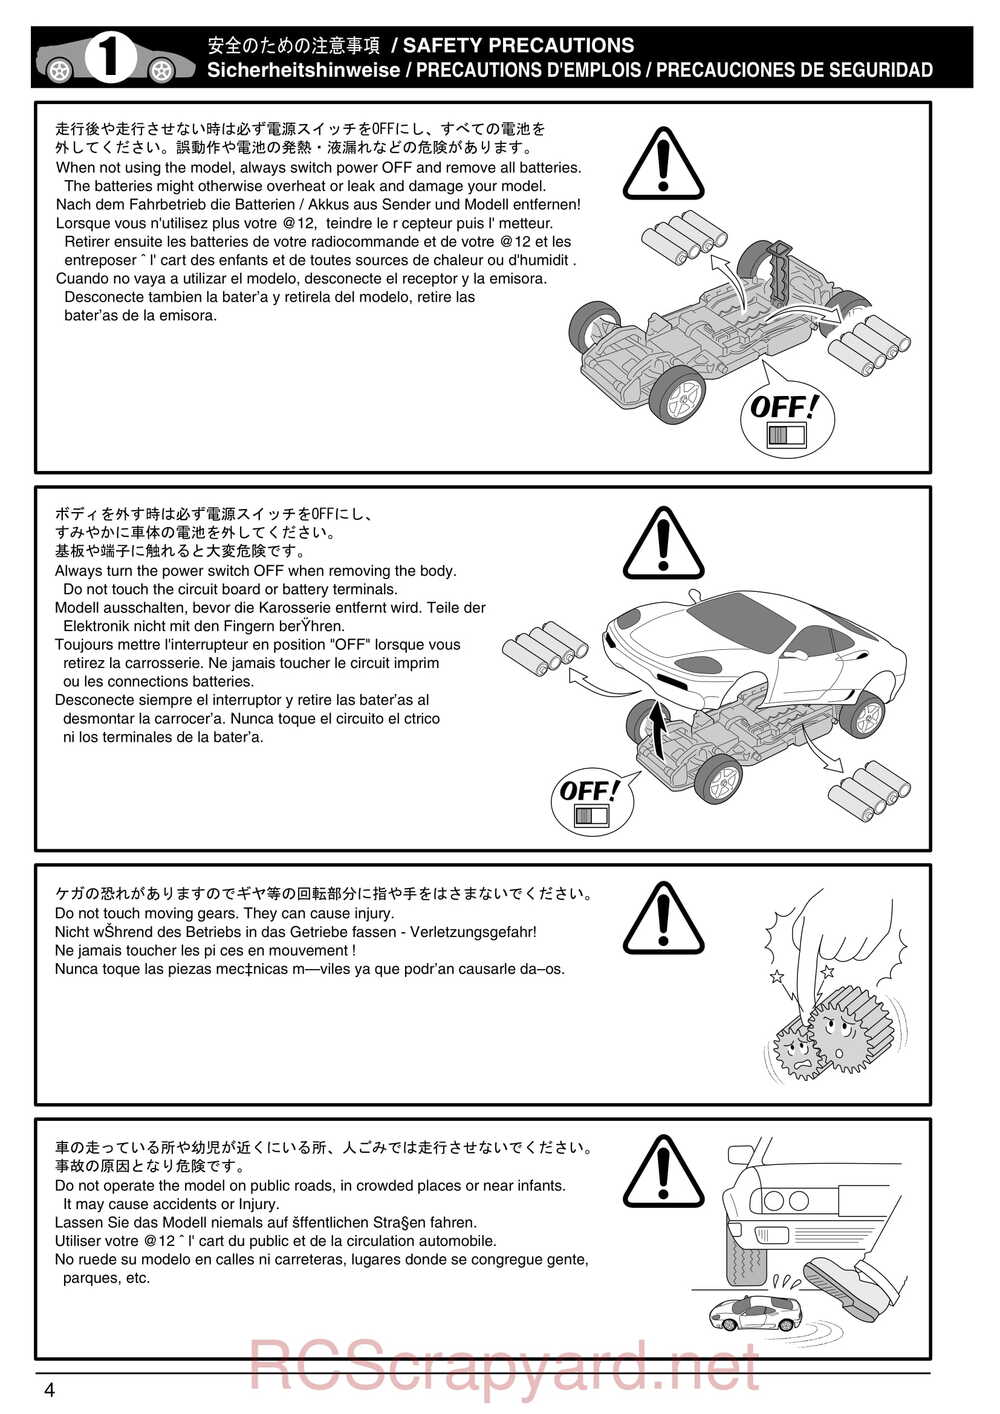 Kyosho - 30551 - a12 Sport - Manual - Page 04